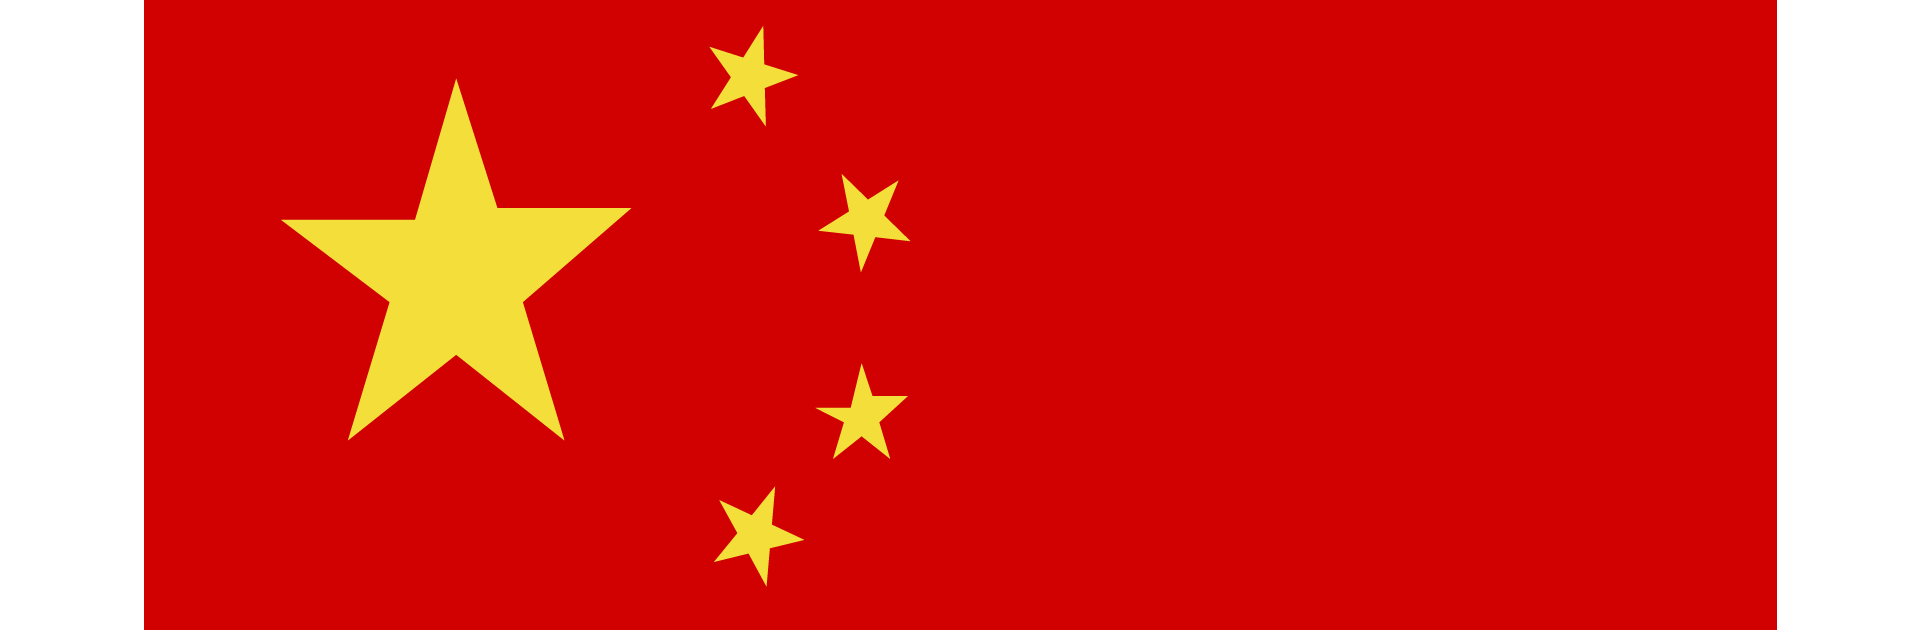 The flag of China in red with goldne stars in the upper left corner.